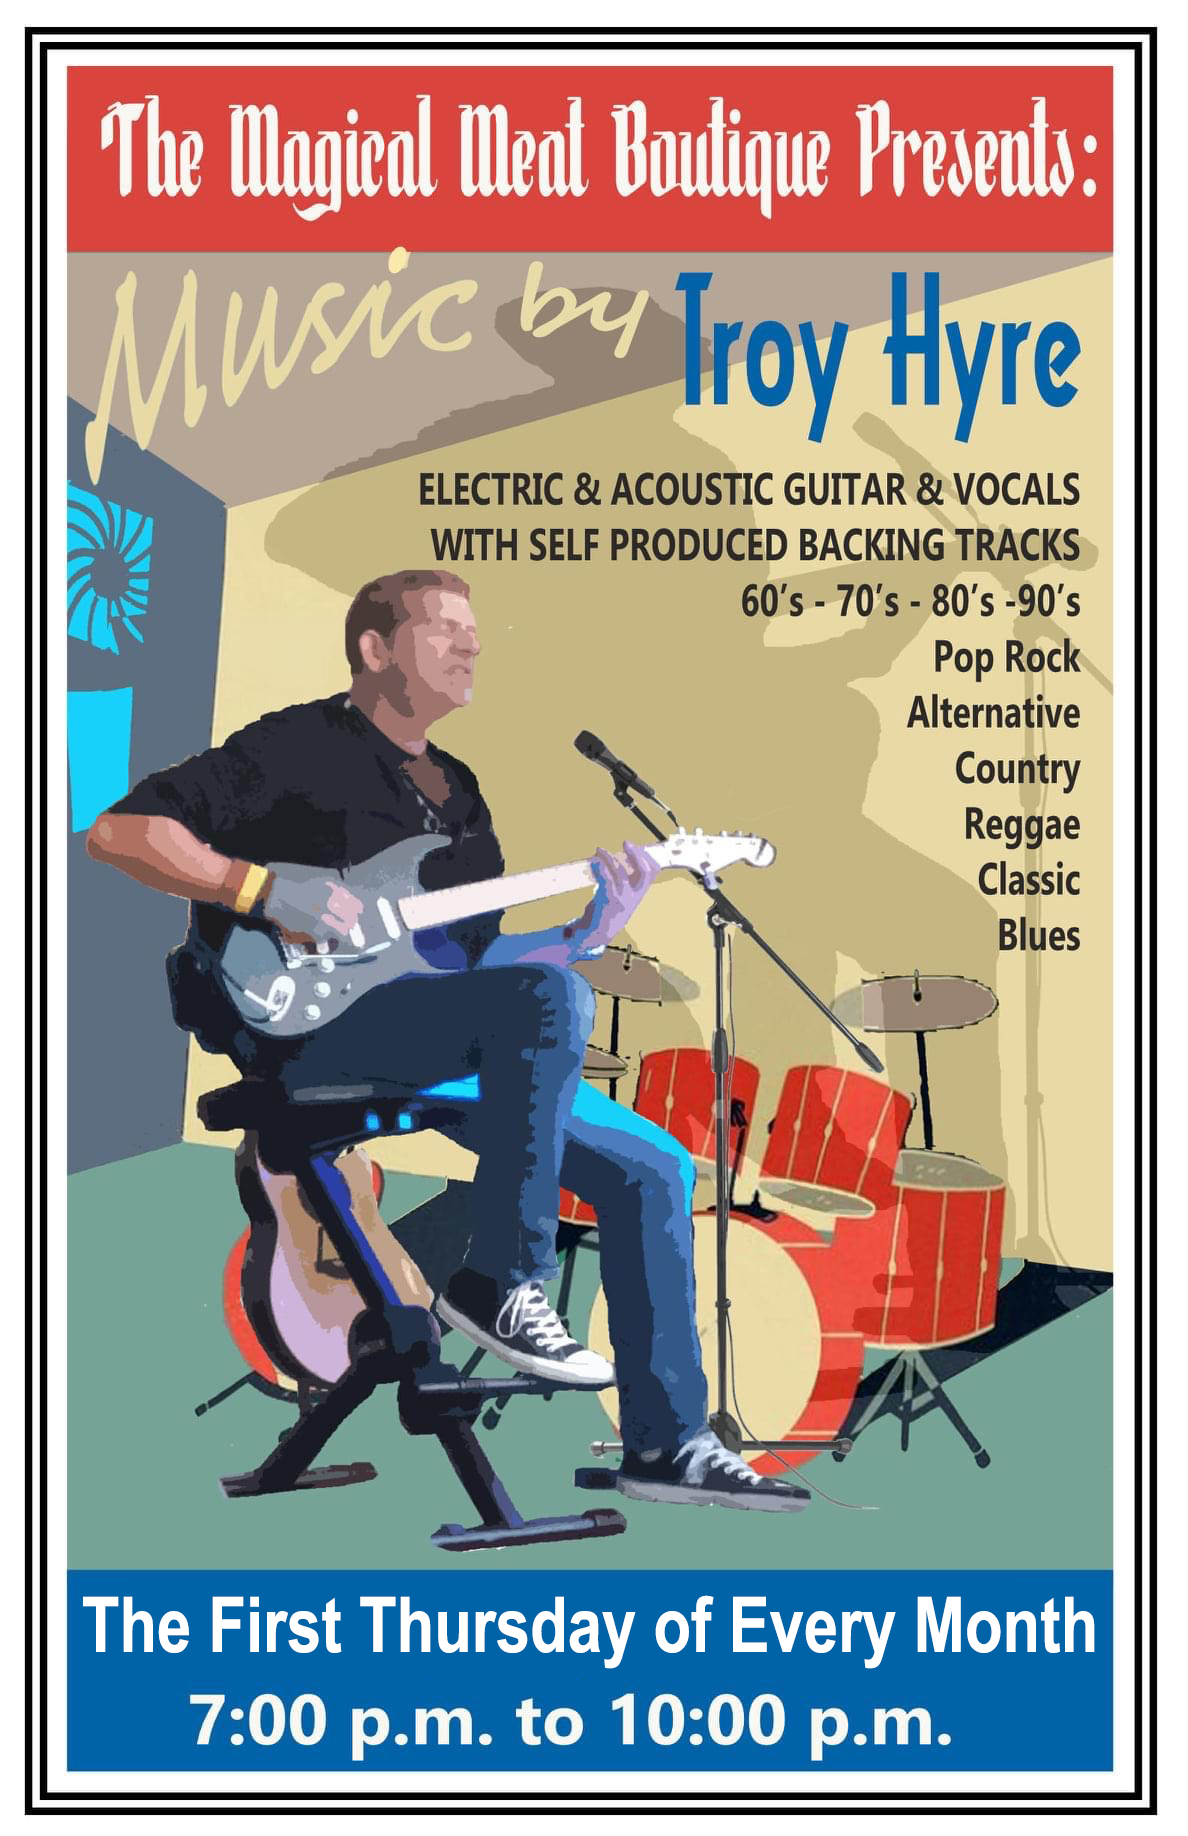 Troy Hyre playing at the Magical Meat Boutiques Every Thursday Evening, 7:00pm - 10:00pm